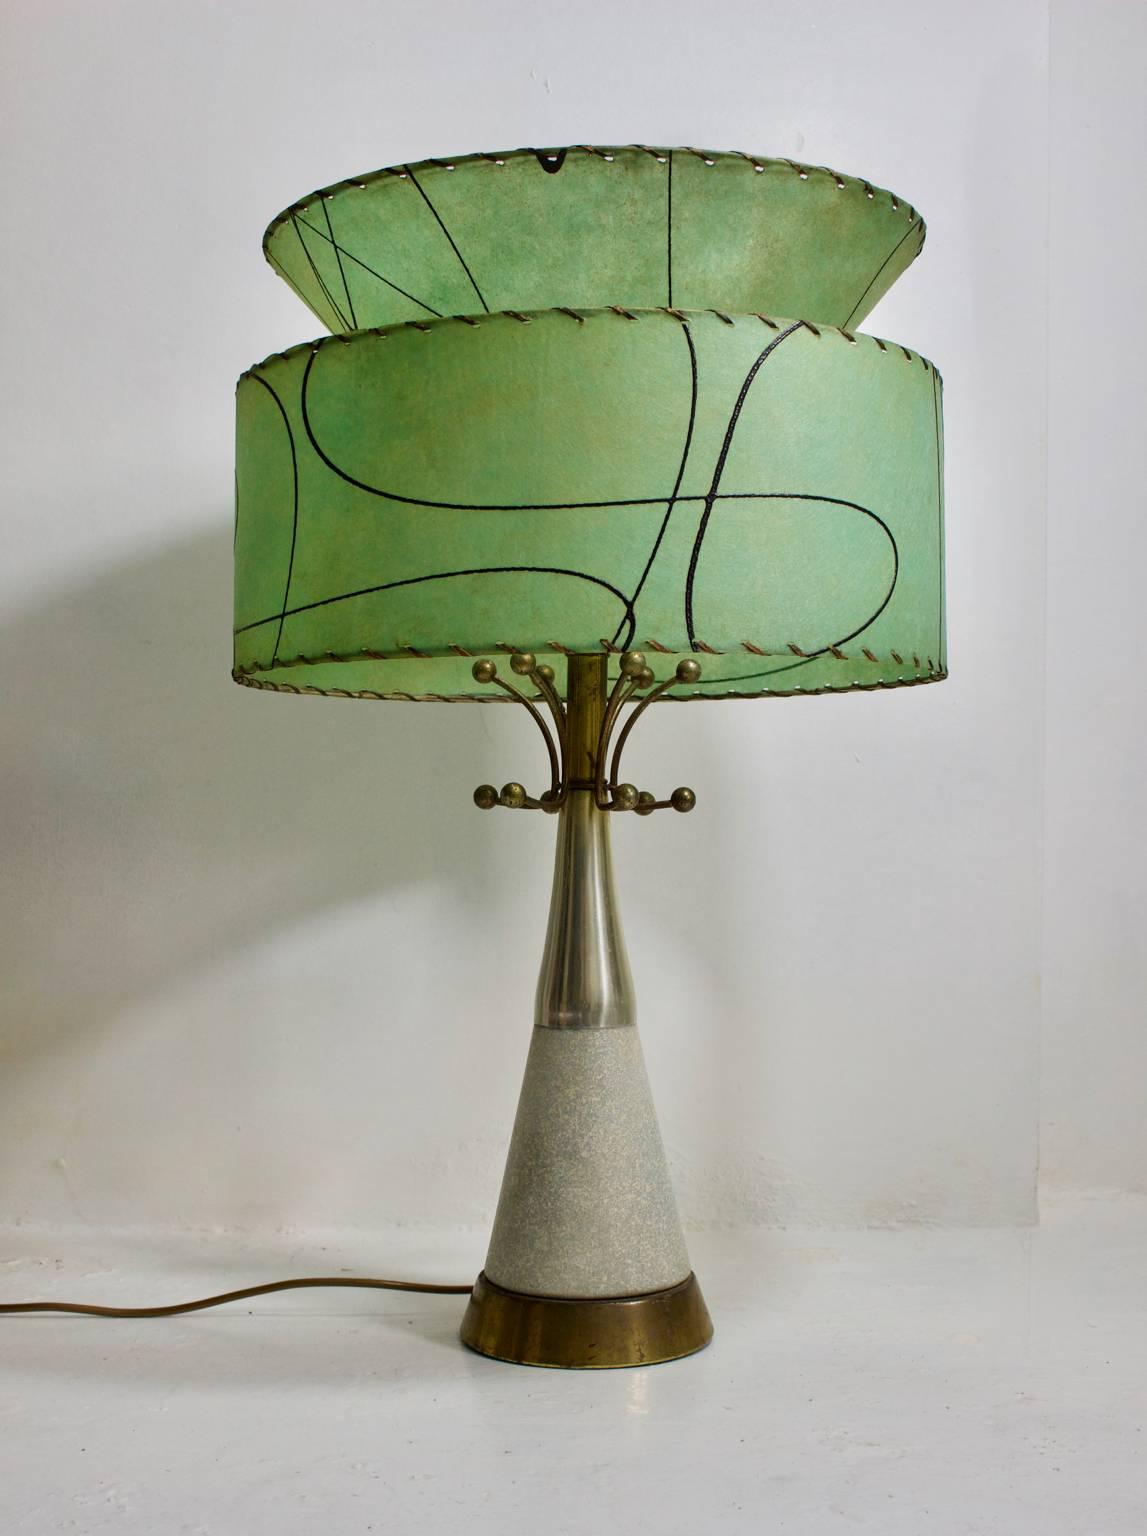 A modernist ceramic table lamp with atomic details, and original fibreglass shade. Probably from the United States, 1950s.

The lamp base sits on a brass base; the center section is ceramic with a grey speckled glaze and the top cone is aluminium.